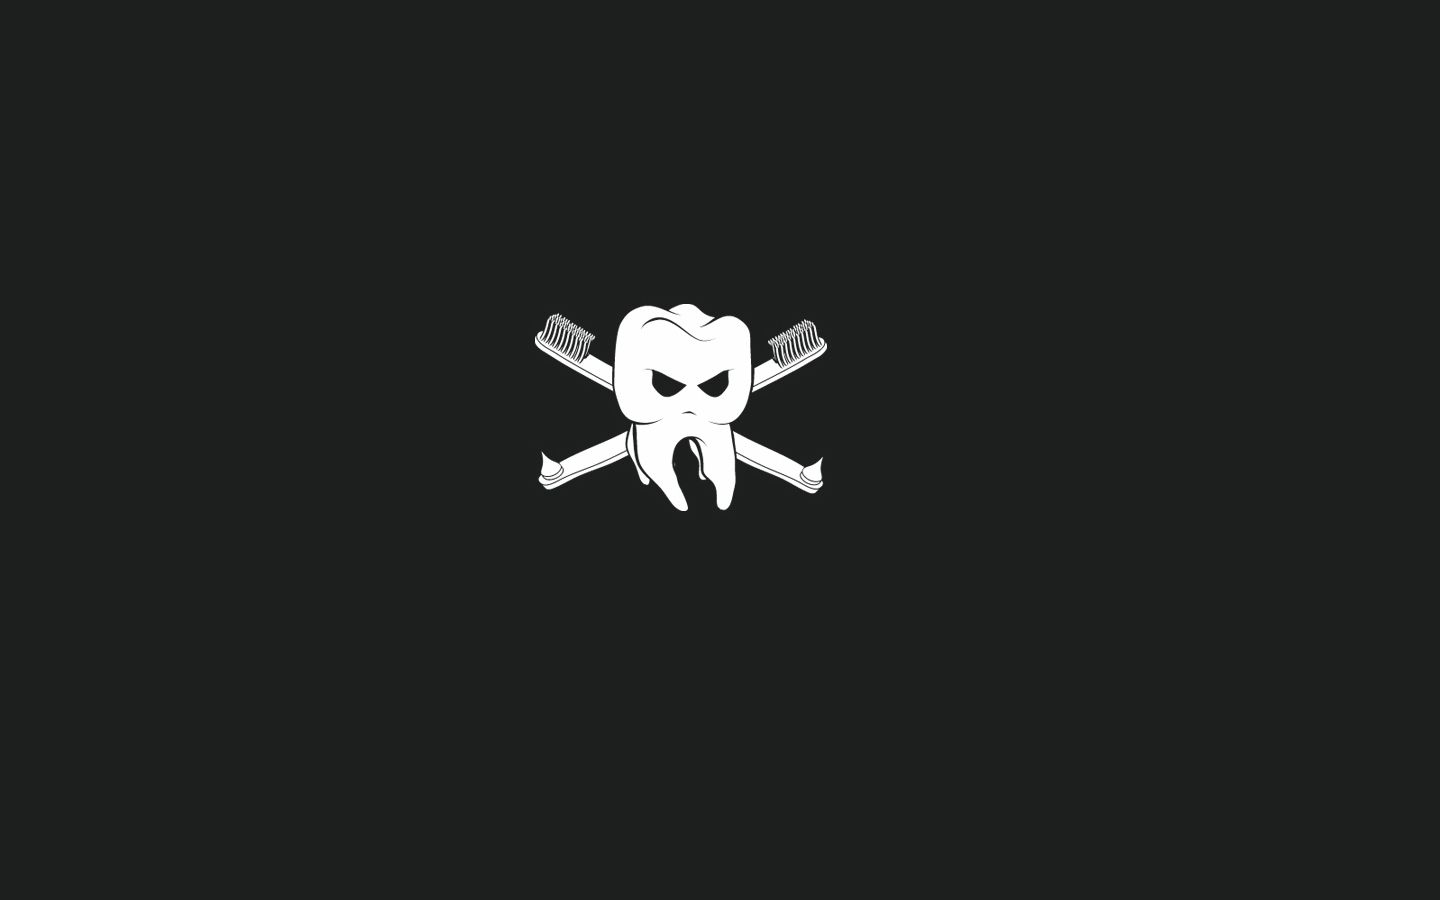 A toothy pirate flag - Dentist